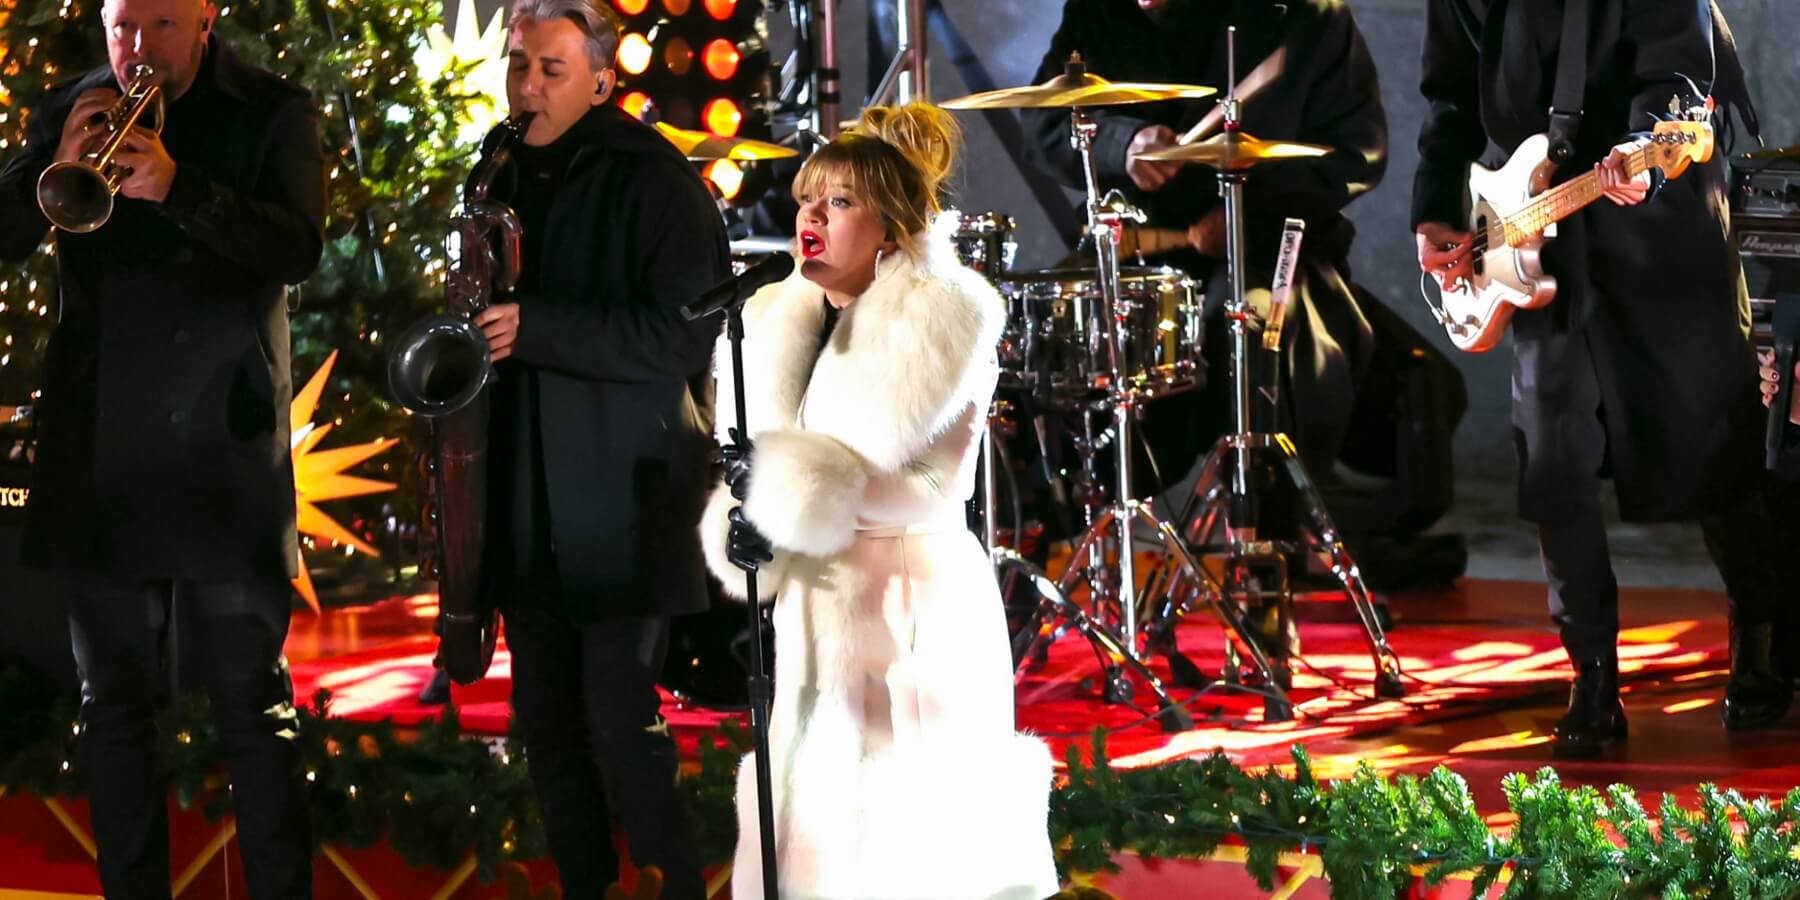 Kelly Clarkson hosts and performs at the 2023 Rockefeller Center Christmas Tree lighting ceremony.